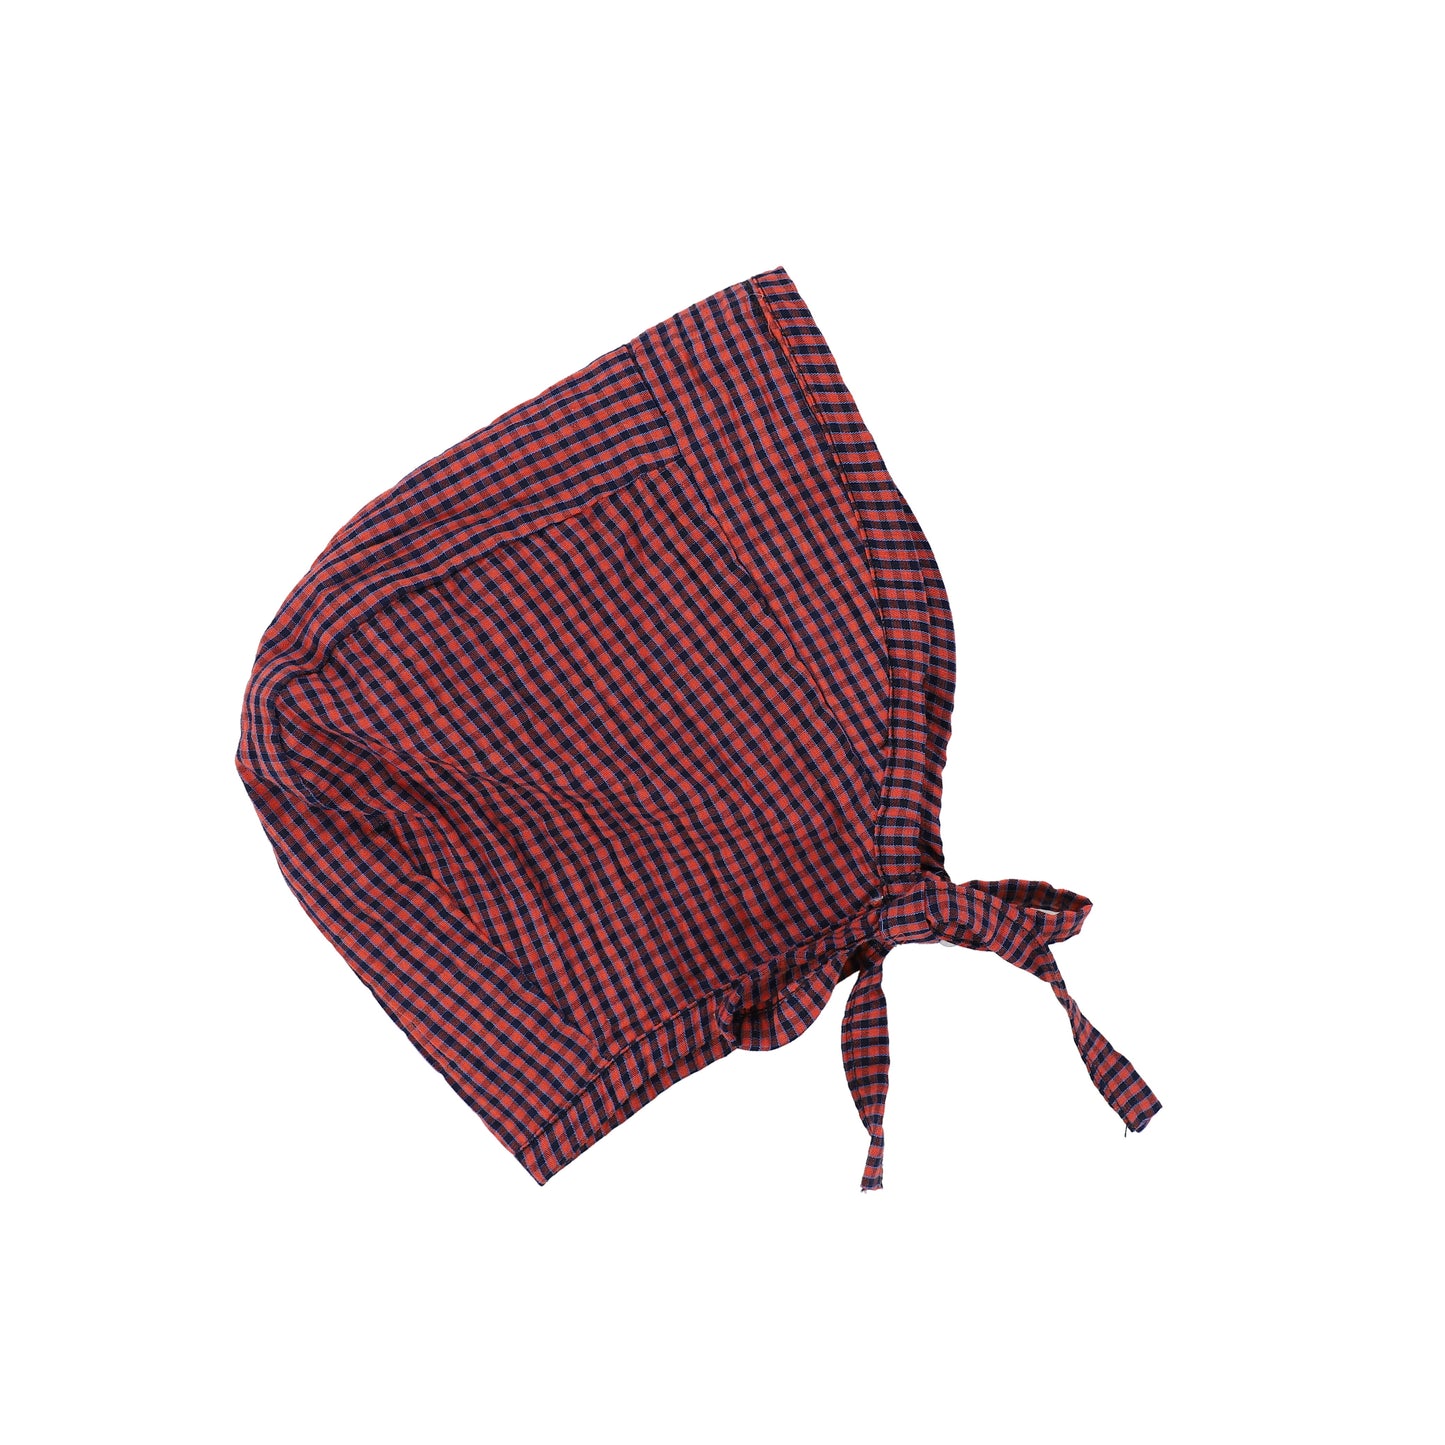 PEQUENO TOCON RED CHECKERED BONNET [Final Sale]